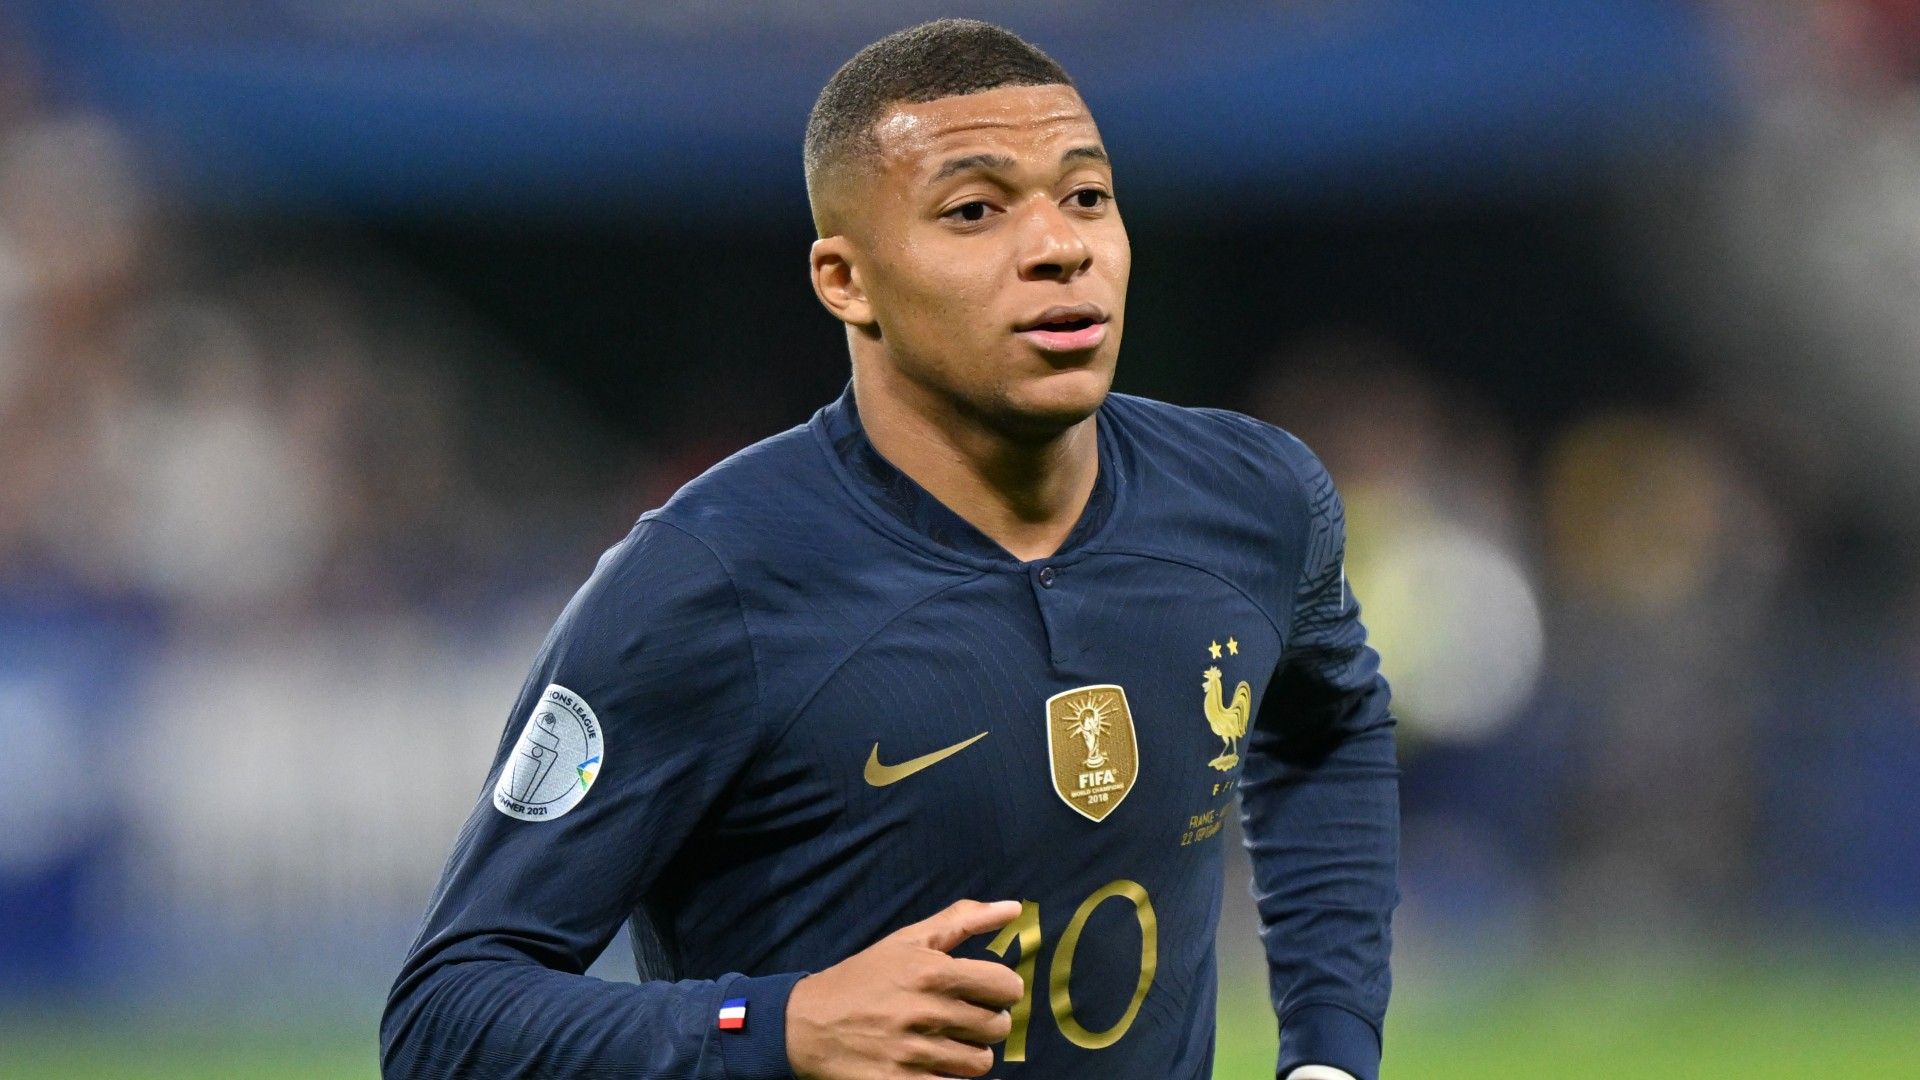 Kylian Mbappe says France squad were behind him in image rights row